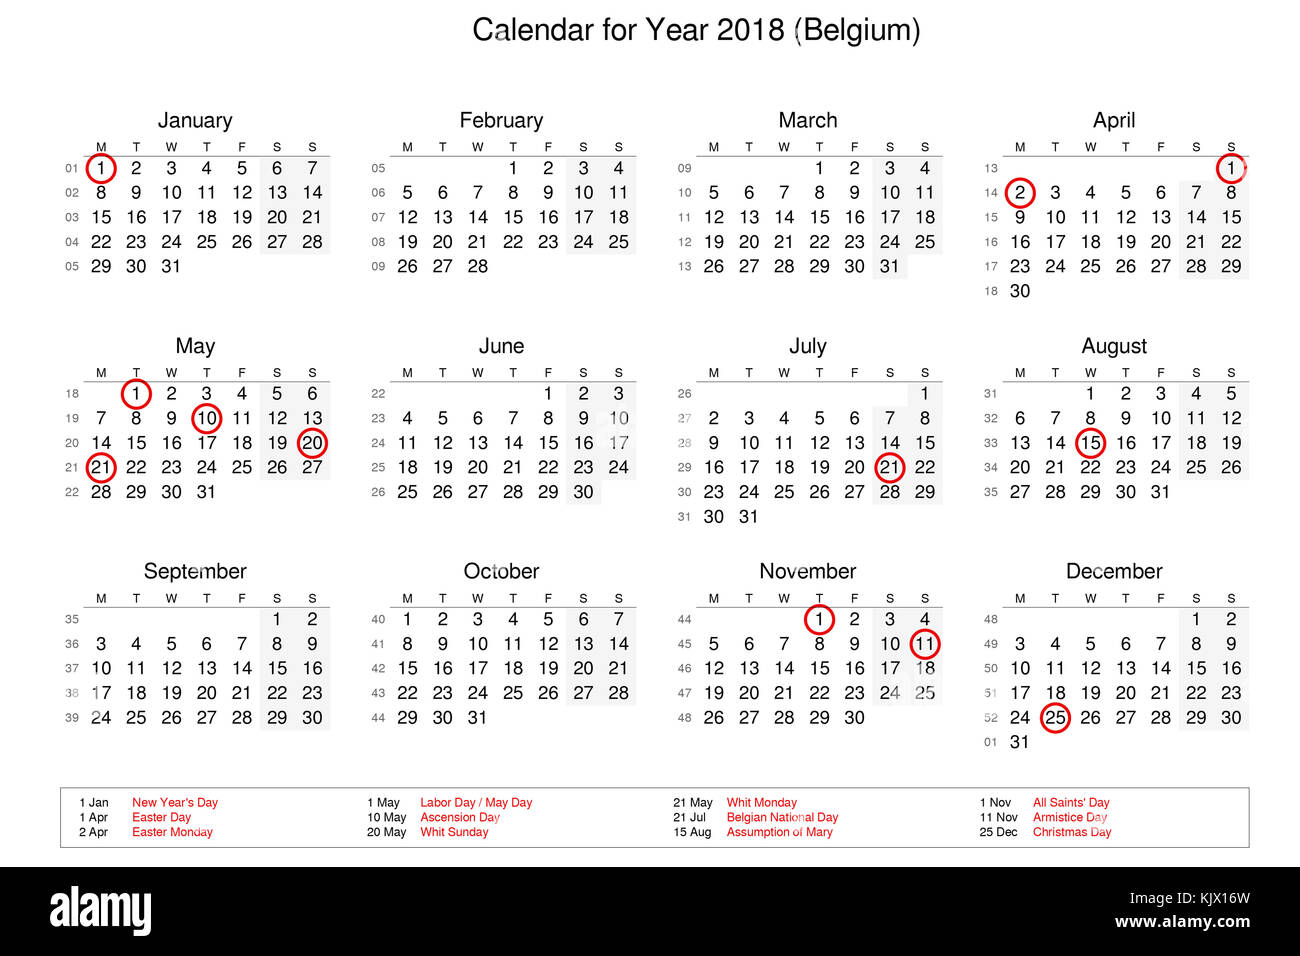 Calendar of year 2018 with public holidays and bank holidays for Belgium  Stock Photo - Alamy